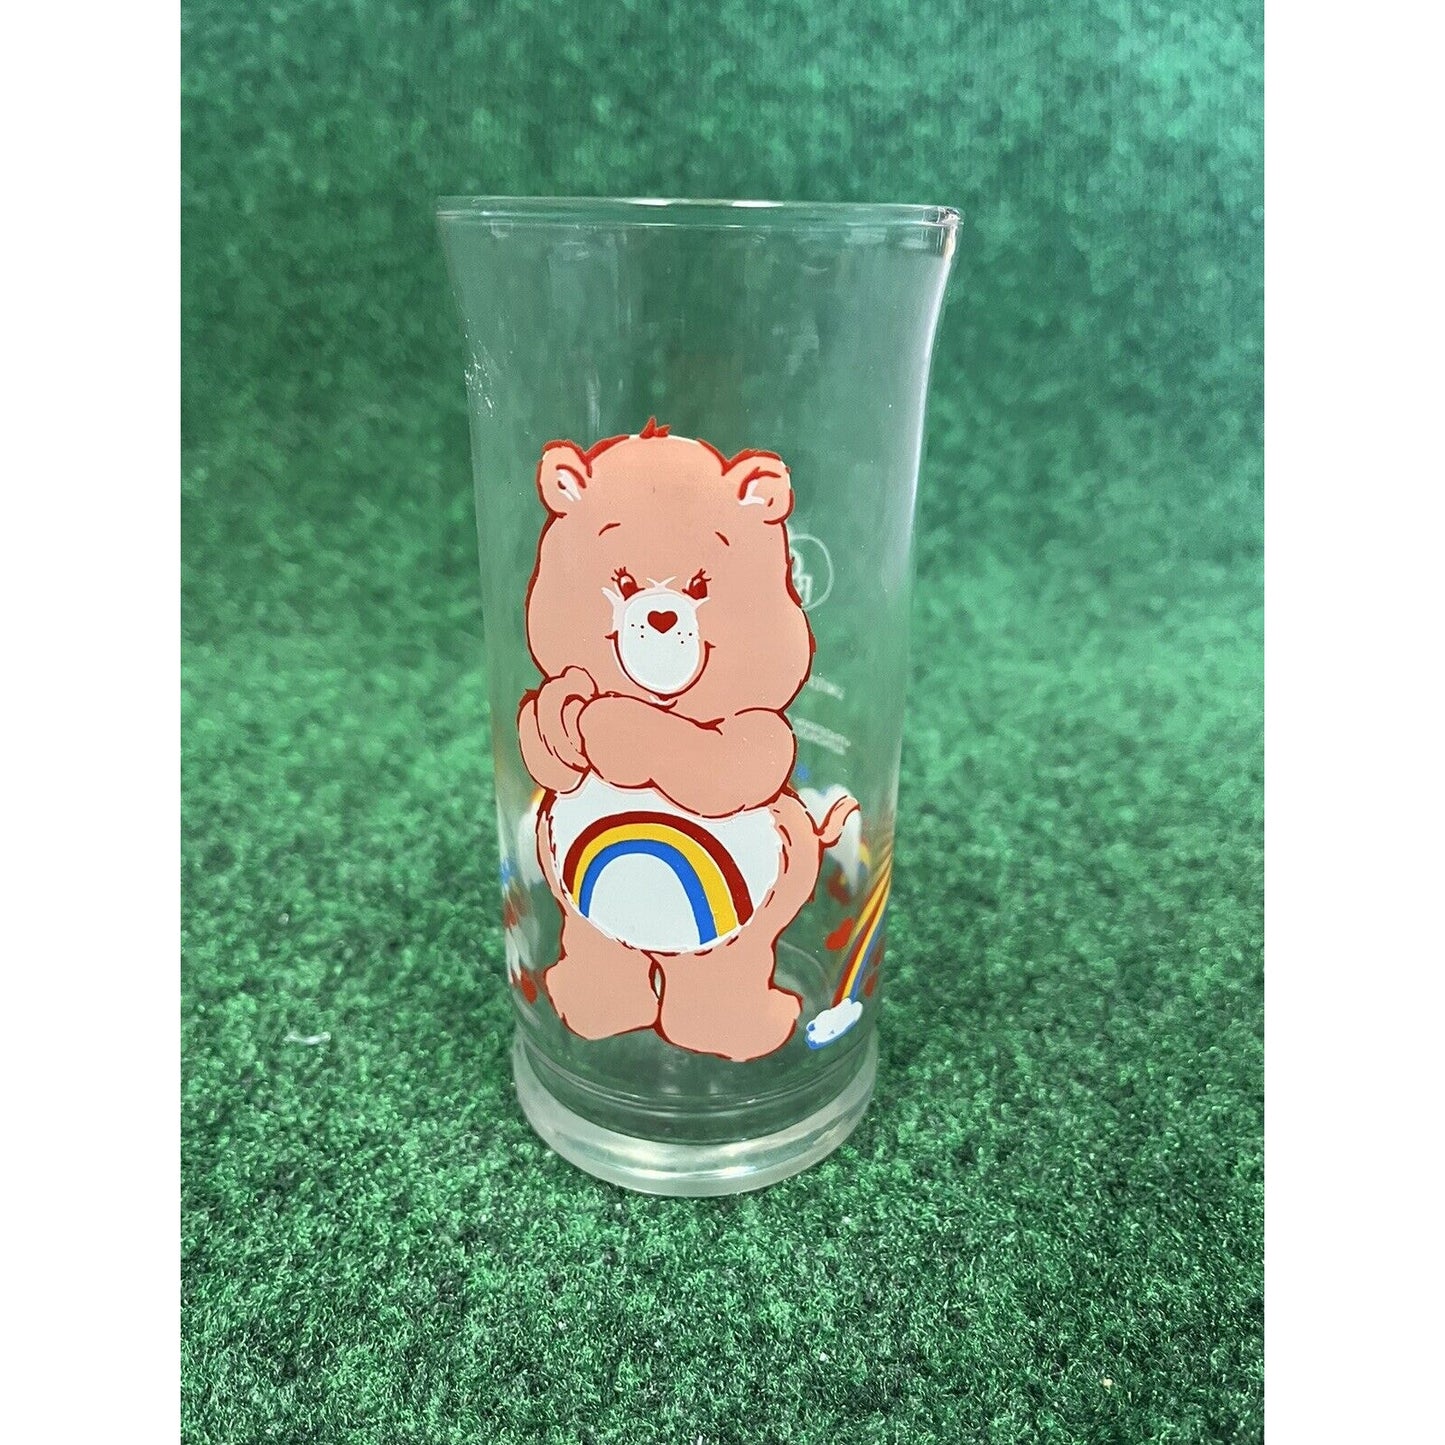 1983 "CARE BEAR" AMERICAN GREETINGS/PIZZA HUT "CHEER BEAR" DRINKING GLASS EXC